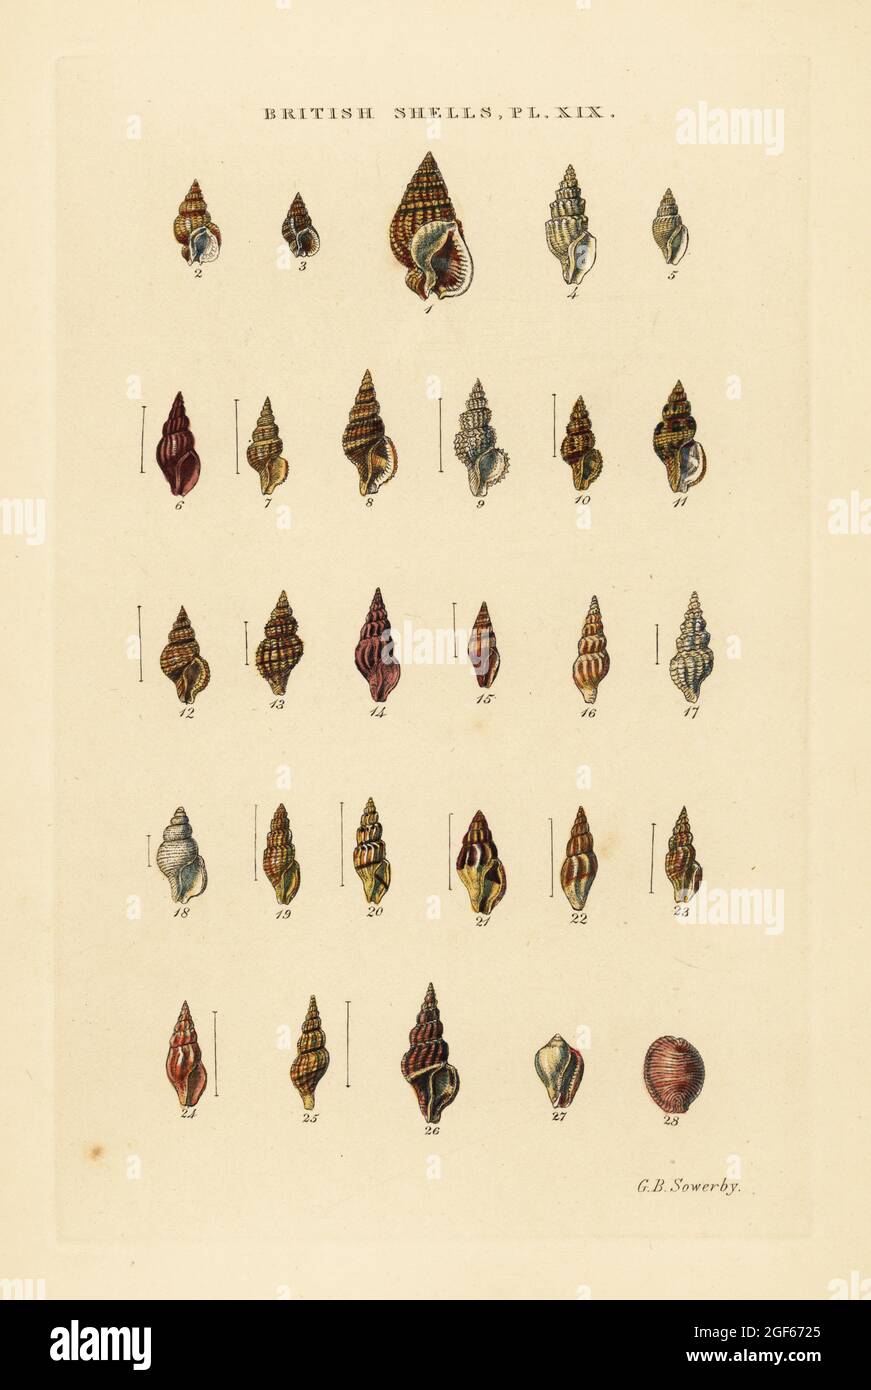 Rock snails and European cowrie, Tritia, Nassa, Mangelia, Erato, Cypraea, etc. Handcoloured copperplate engraving by George Brettingham Sowerby from his own Illustrated Index of British Shells, Sowerby and Simpkin, Marshall & Co., London, 1859. George Brettingham Sowerby II (1812-1884), British naturalist, illustrator, and conchologist. Stock Photo